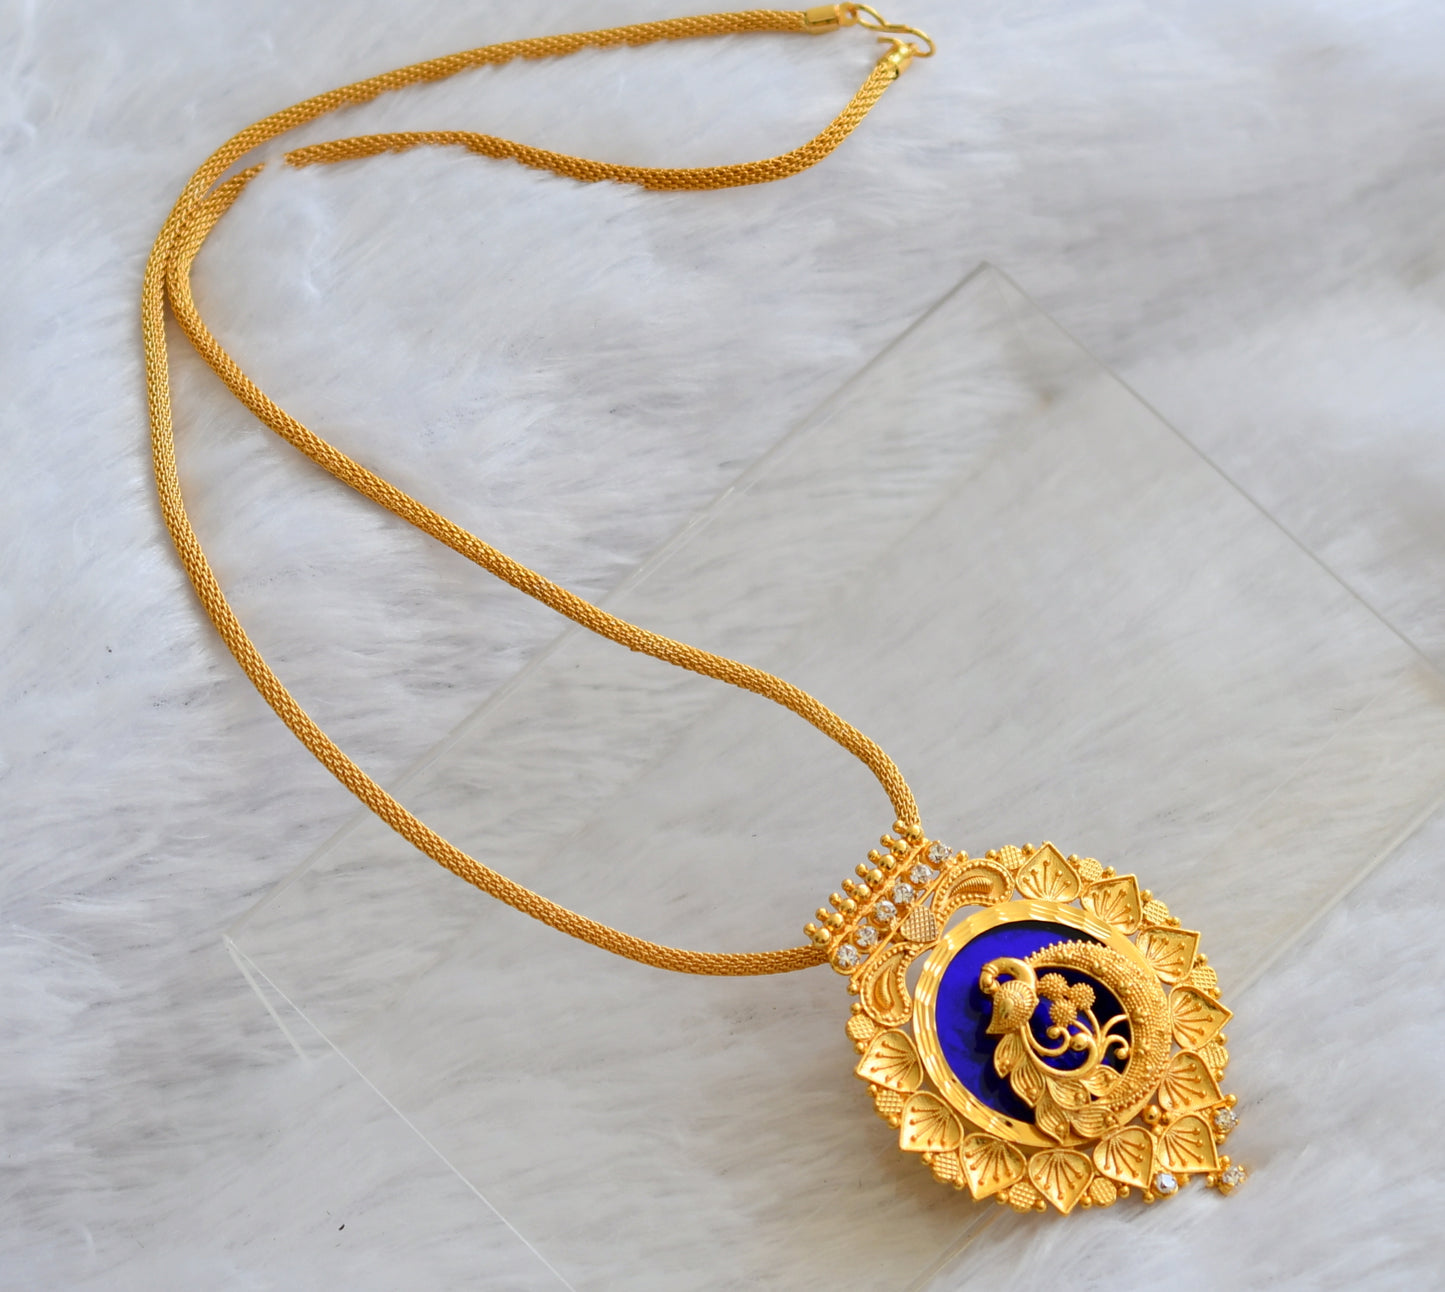 Gold tone kerala style 24 inches chain with white-blue peacock pendant dj-46479